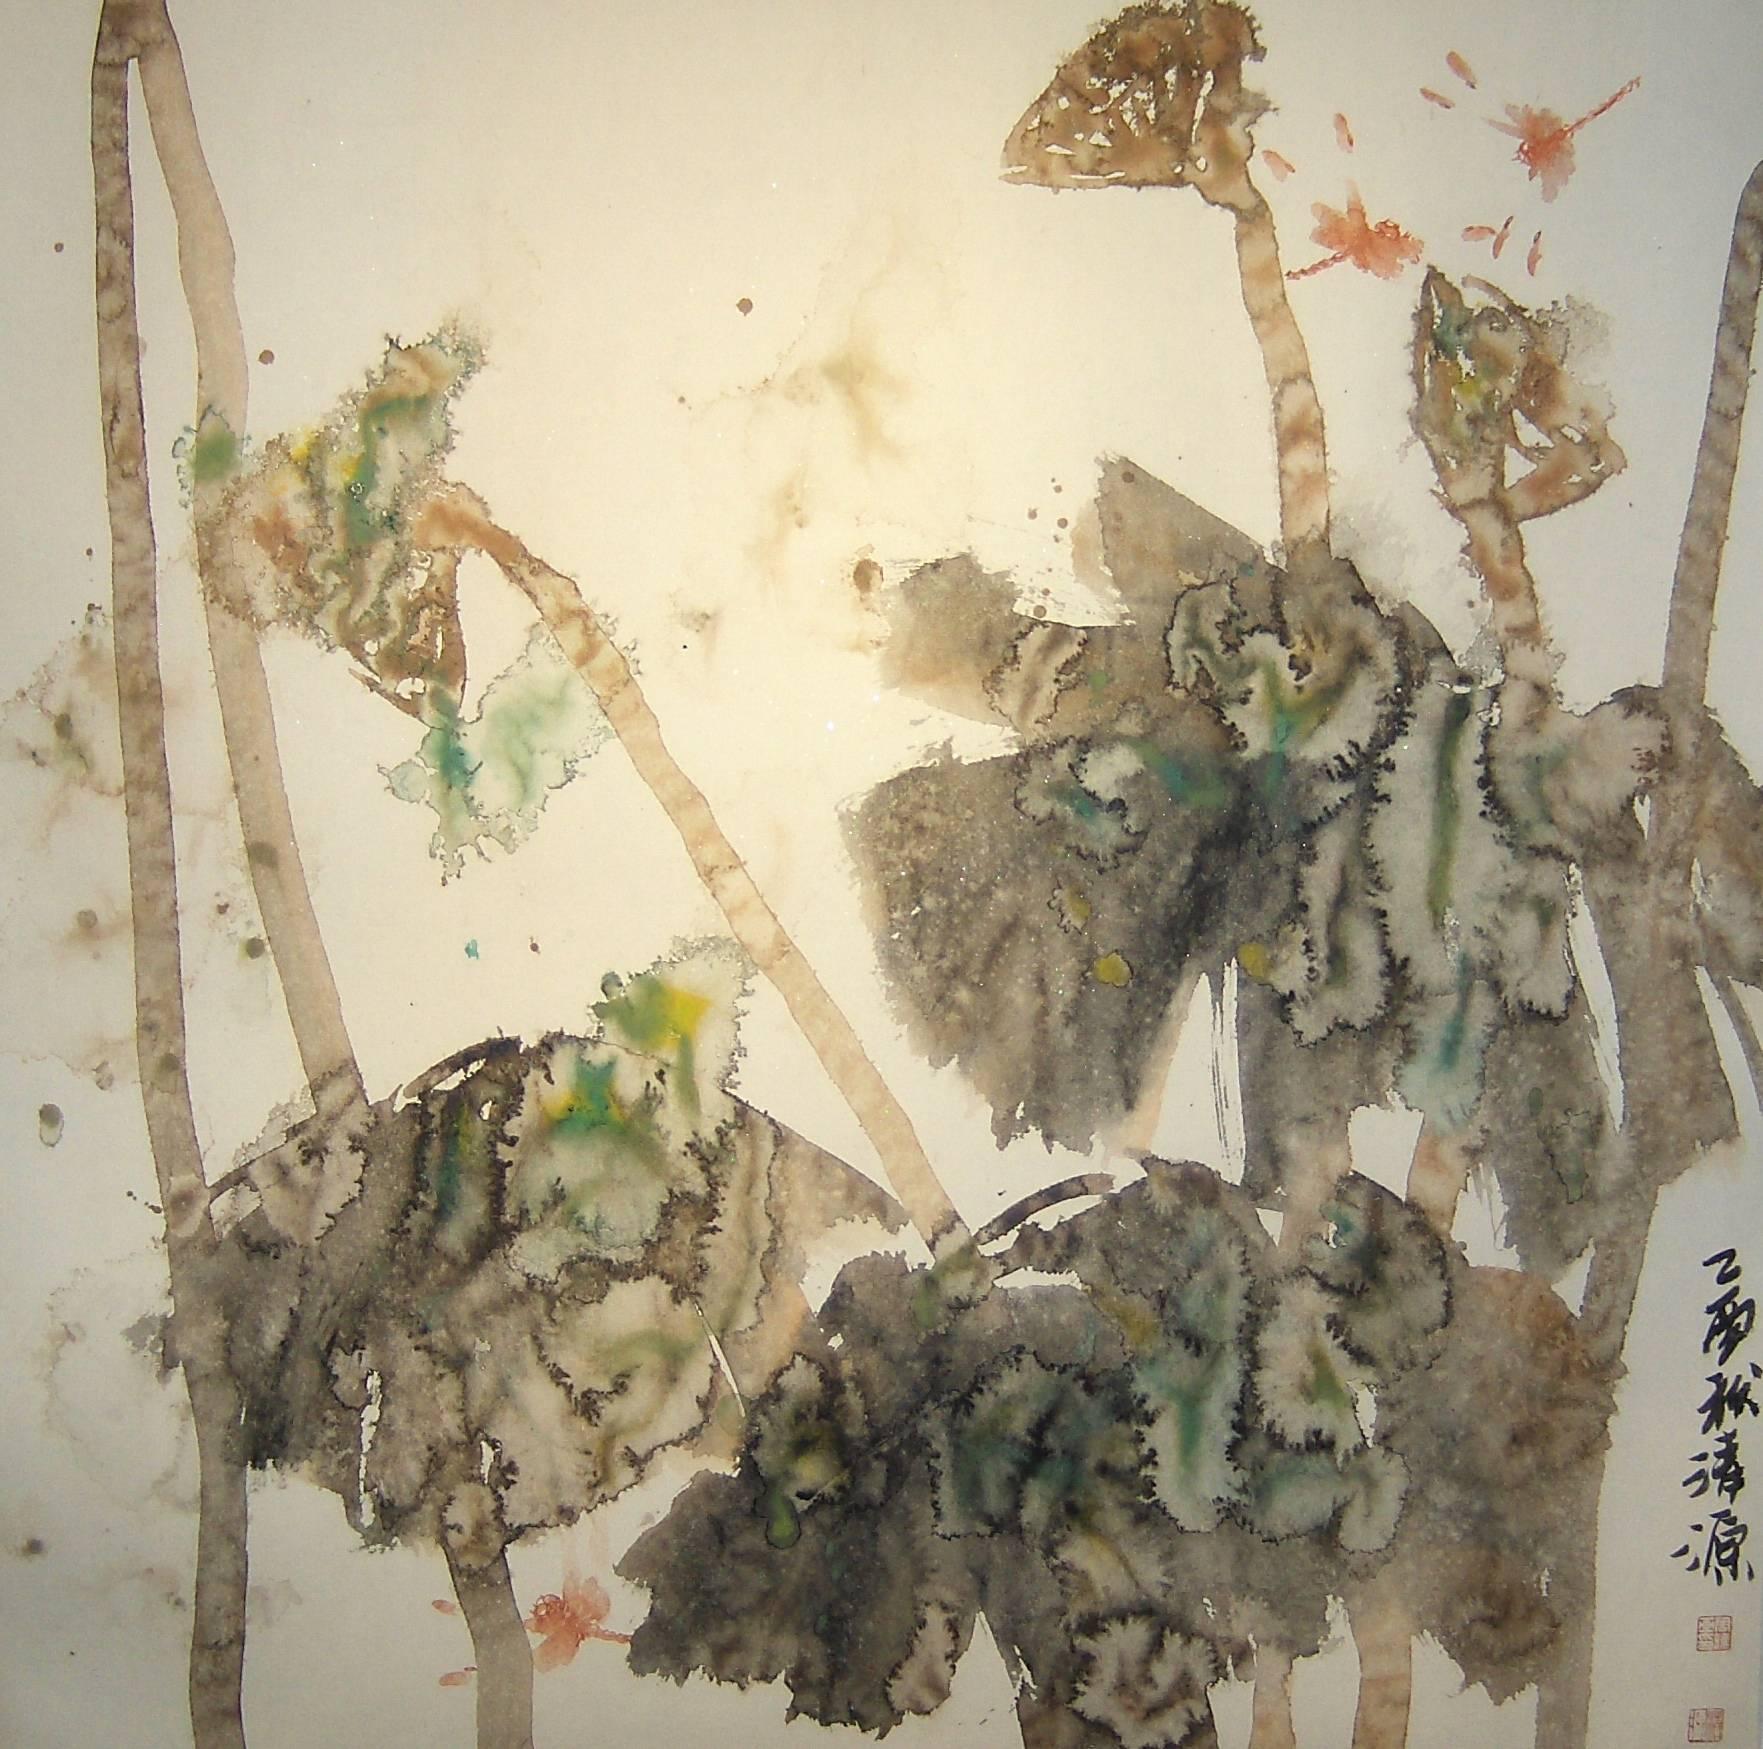 Zhou Xiao Abstract Drawing - "Dragonfly #7" Chinese abstract ink on paper in neutral palette